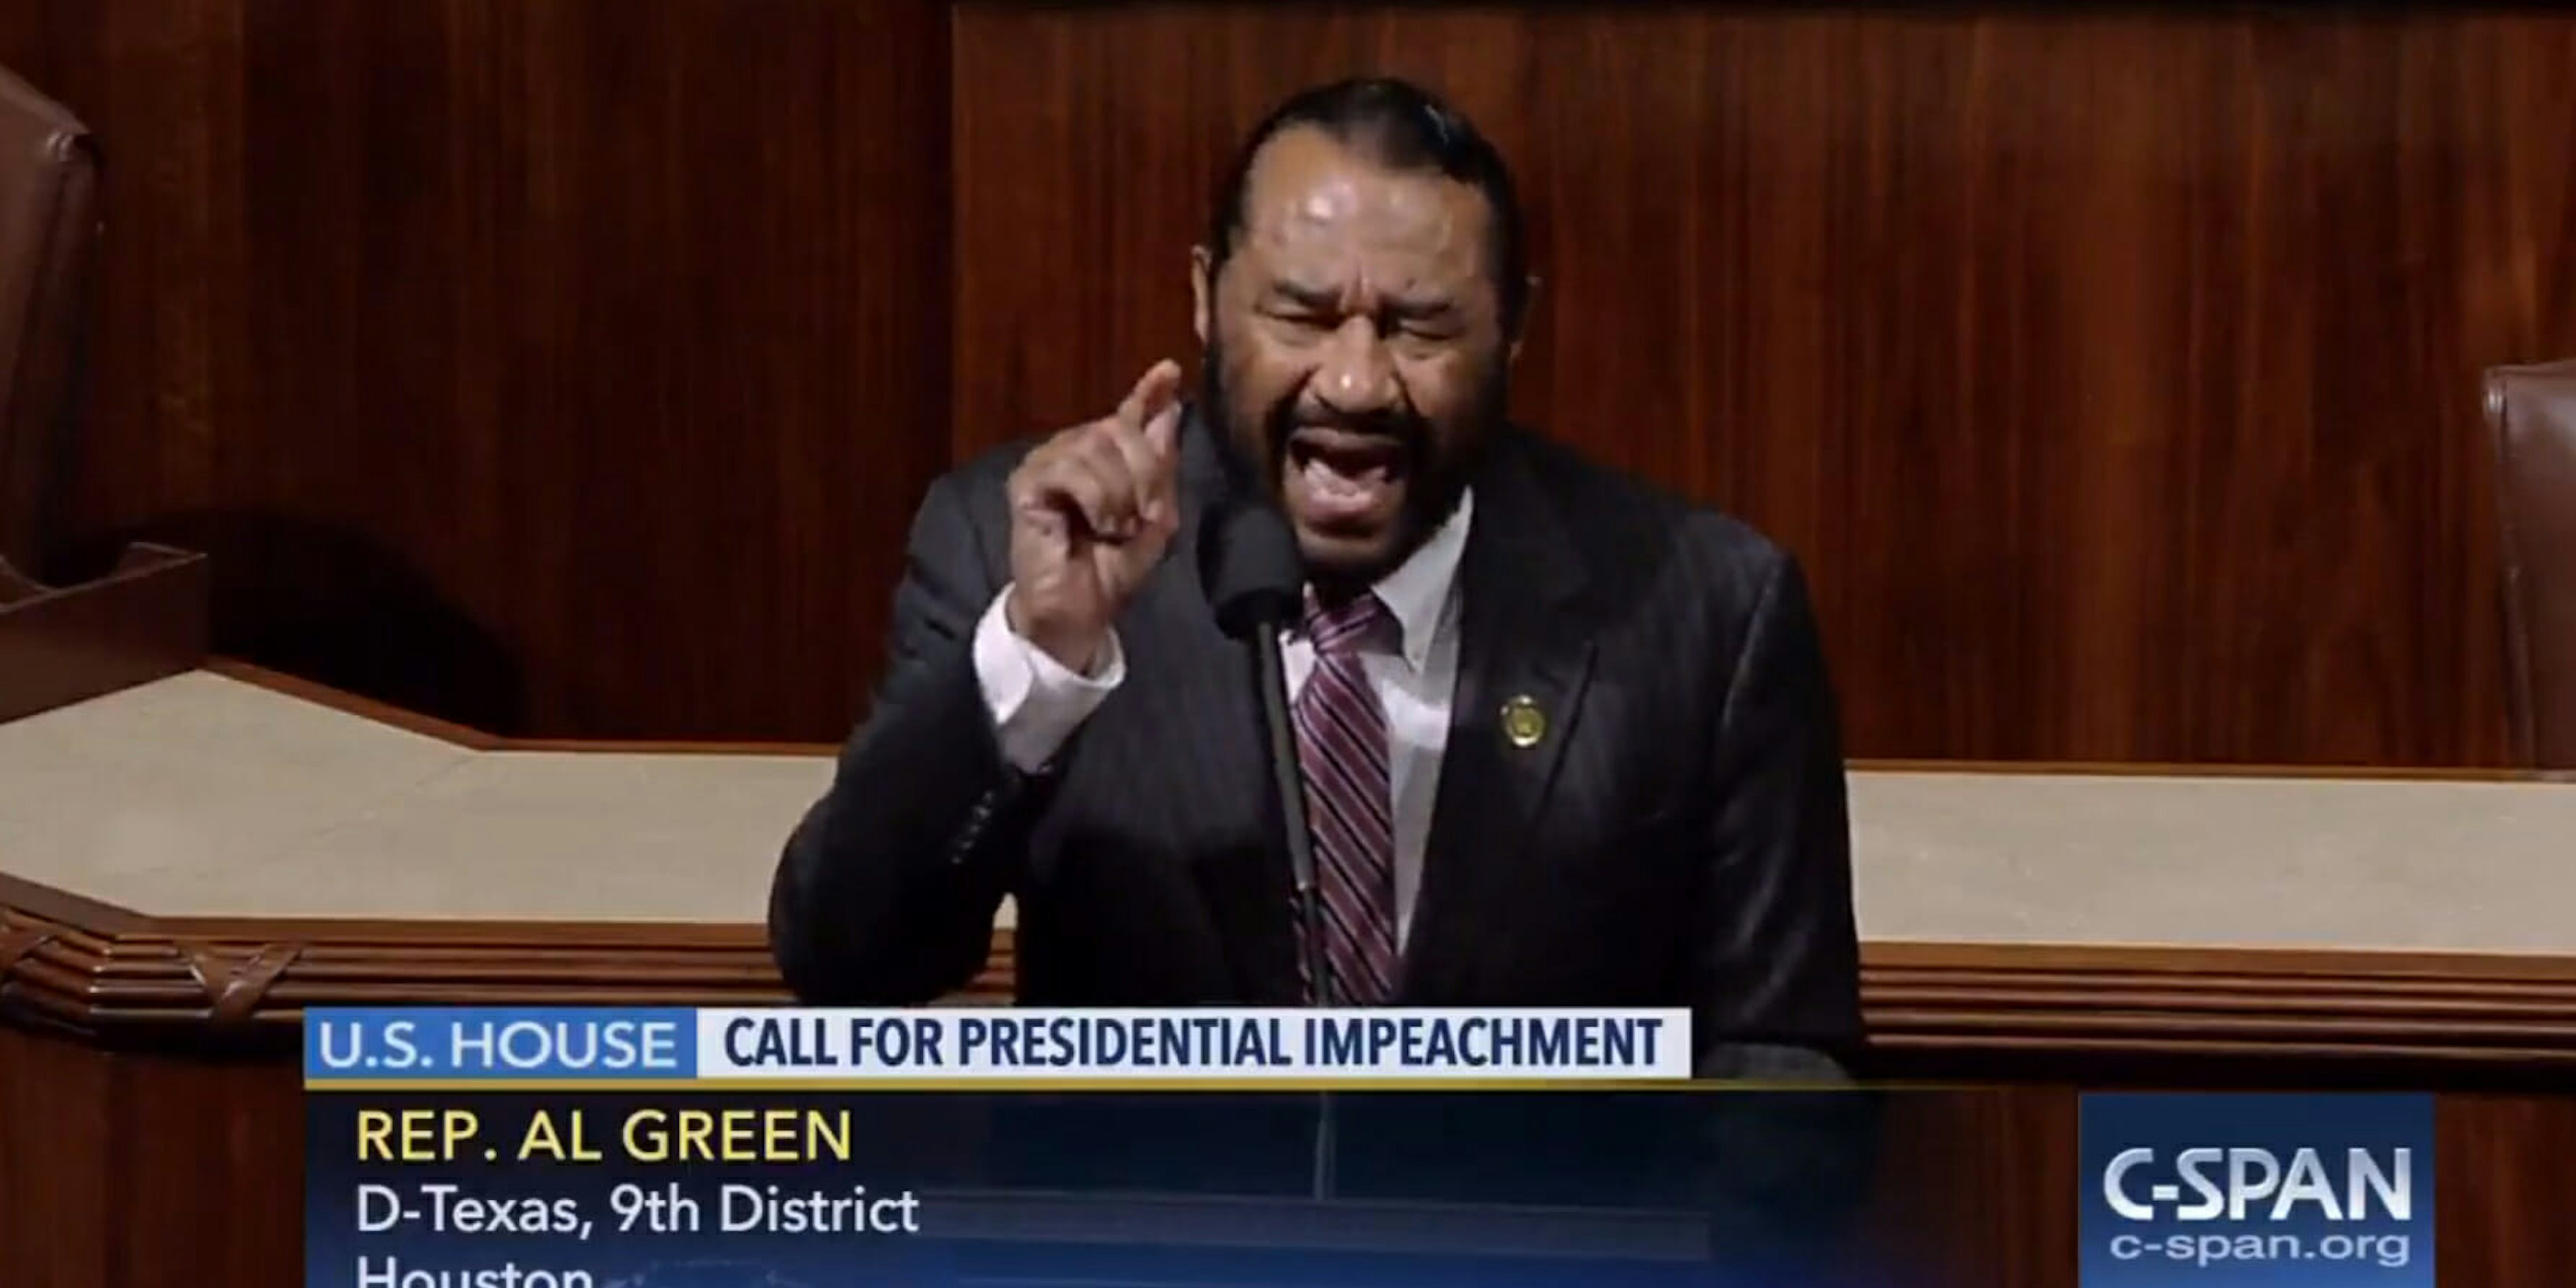 Rep. Al Green calls for the impeachment of Donald Trump on the House floor.